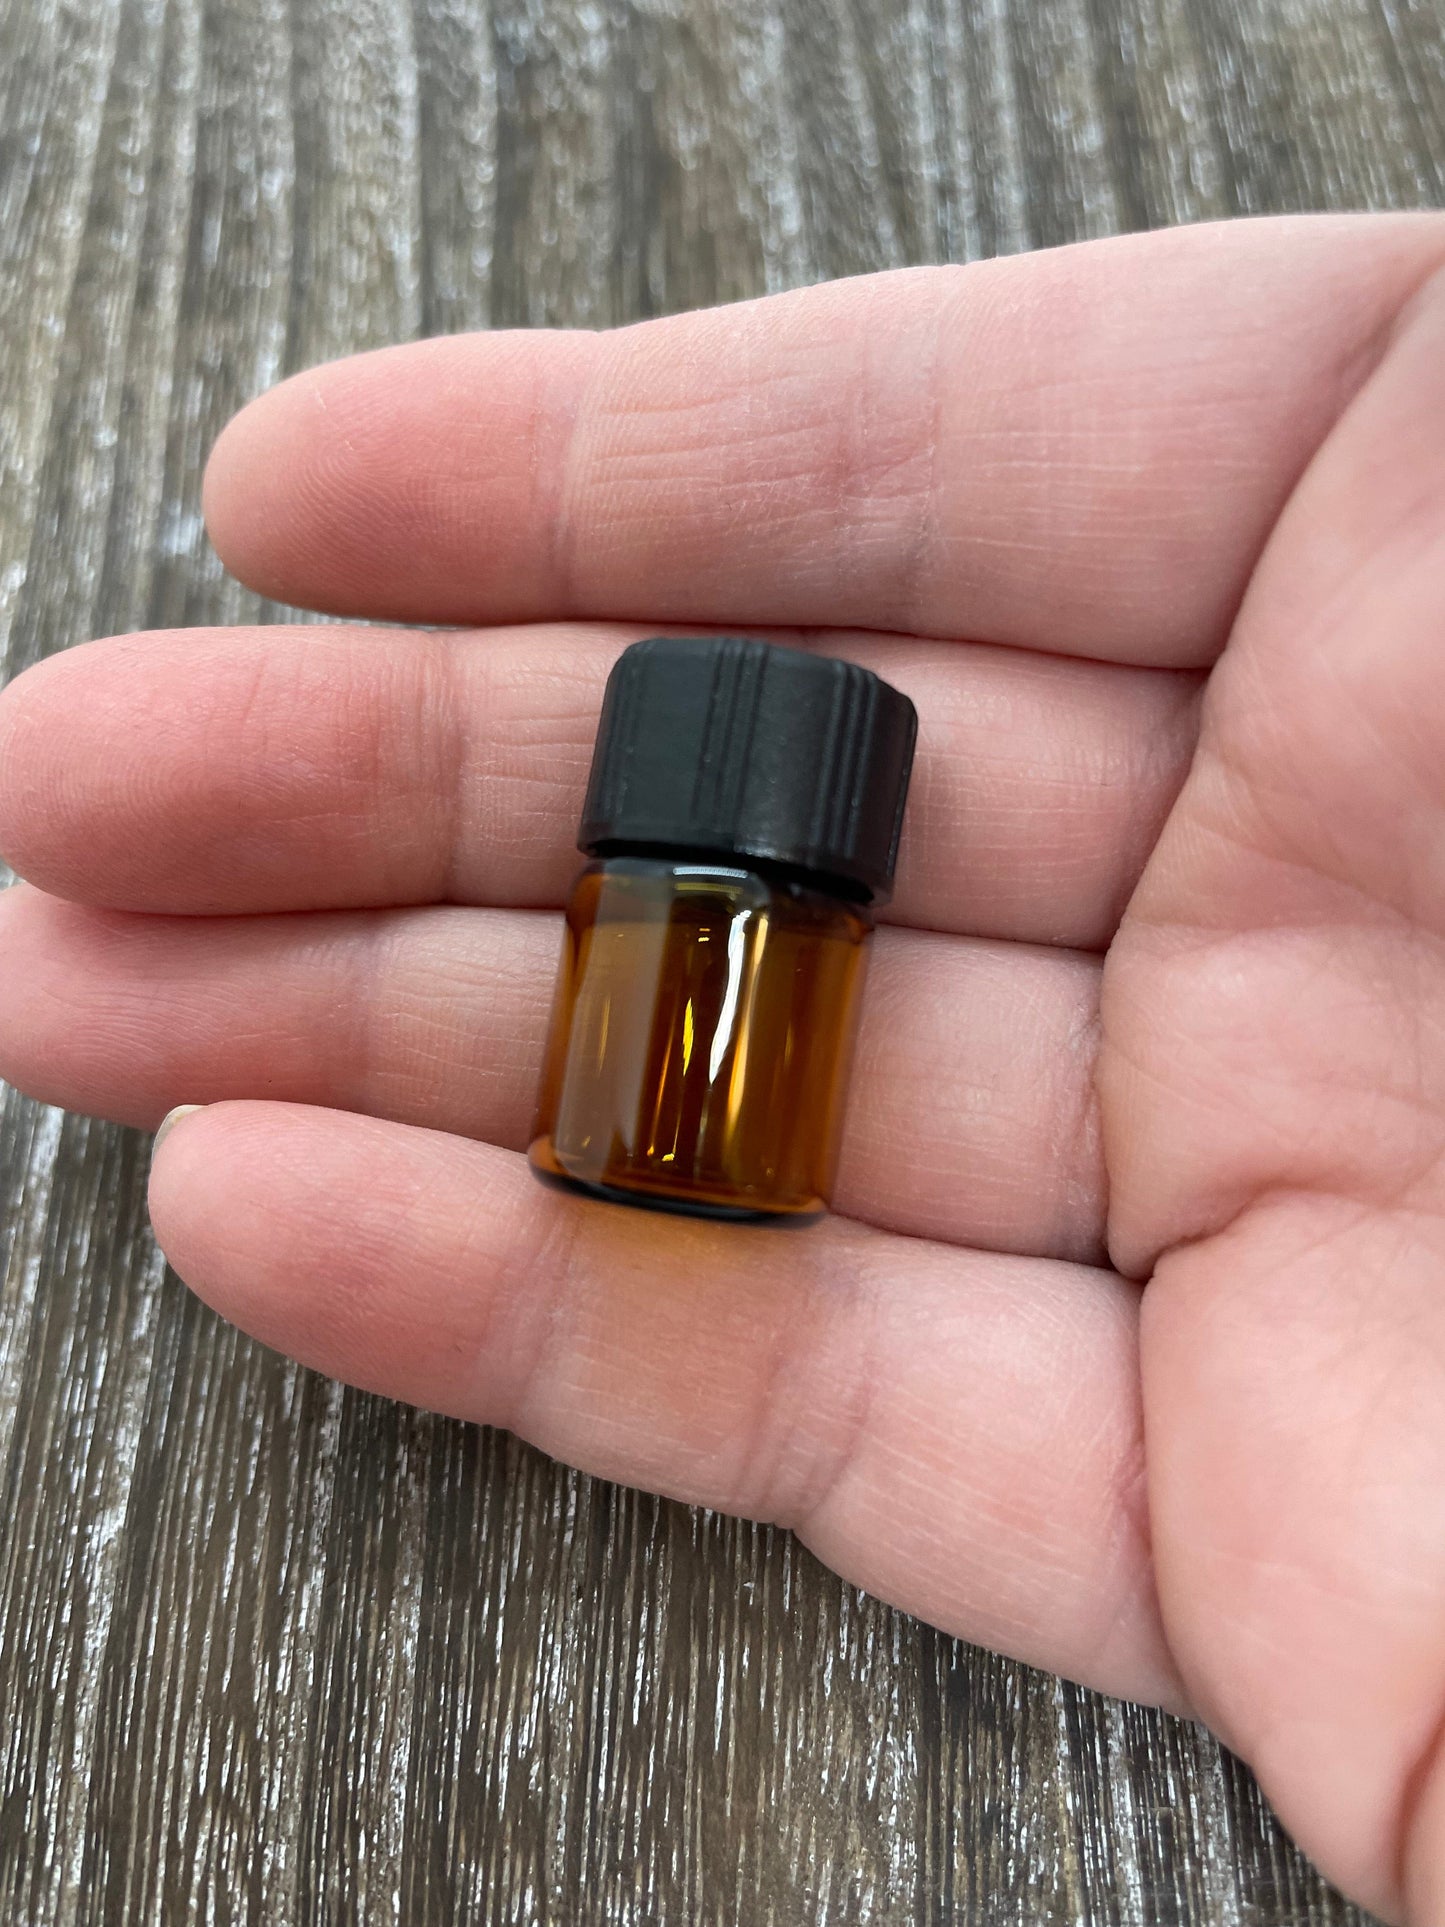 Vial to put your favorite oil and use necklace and/or aromatherapy pen